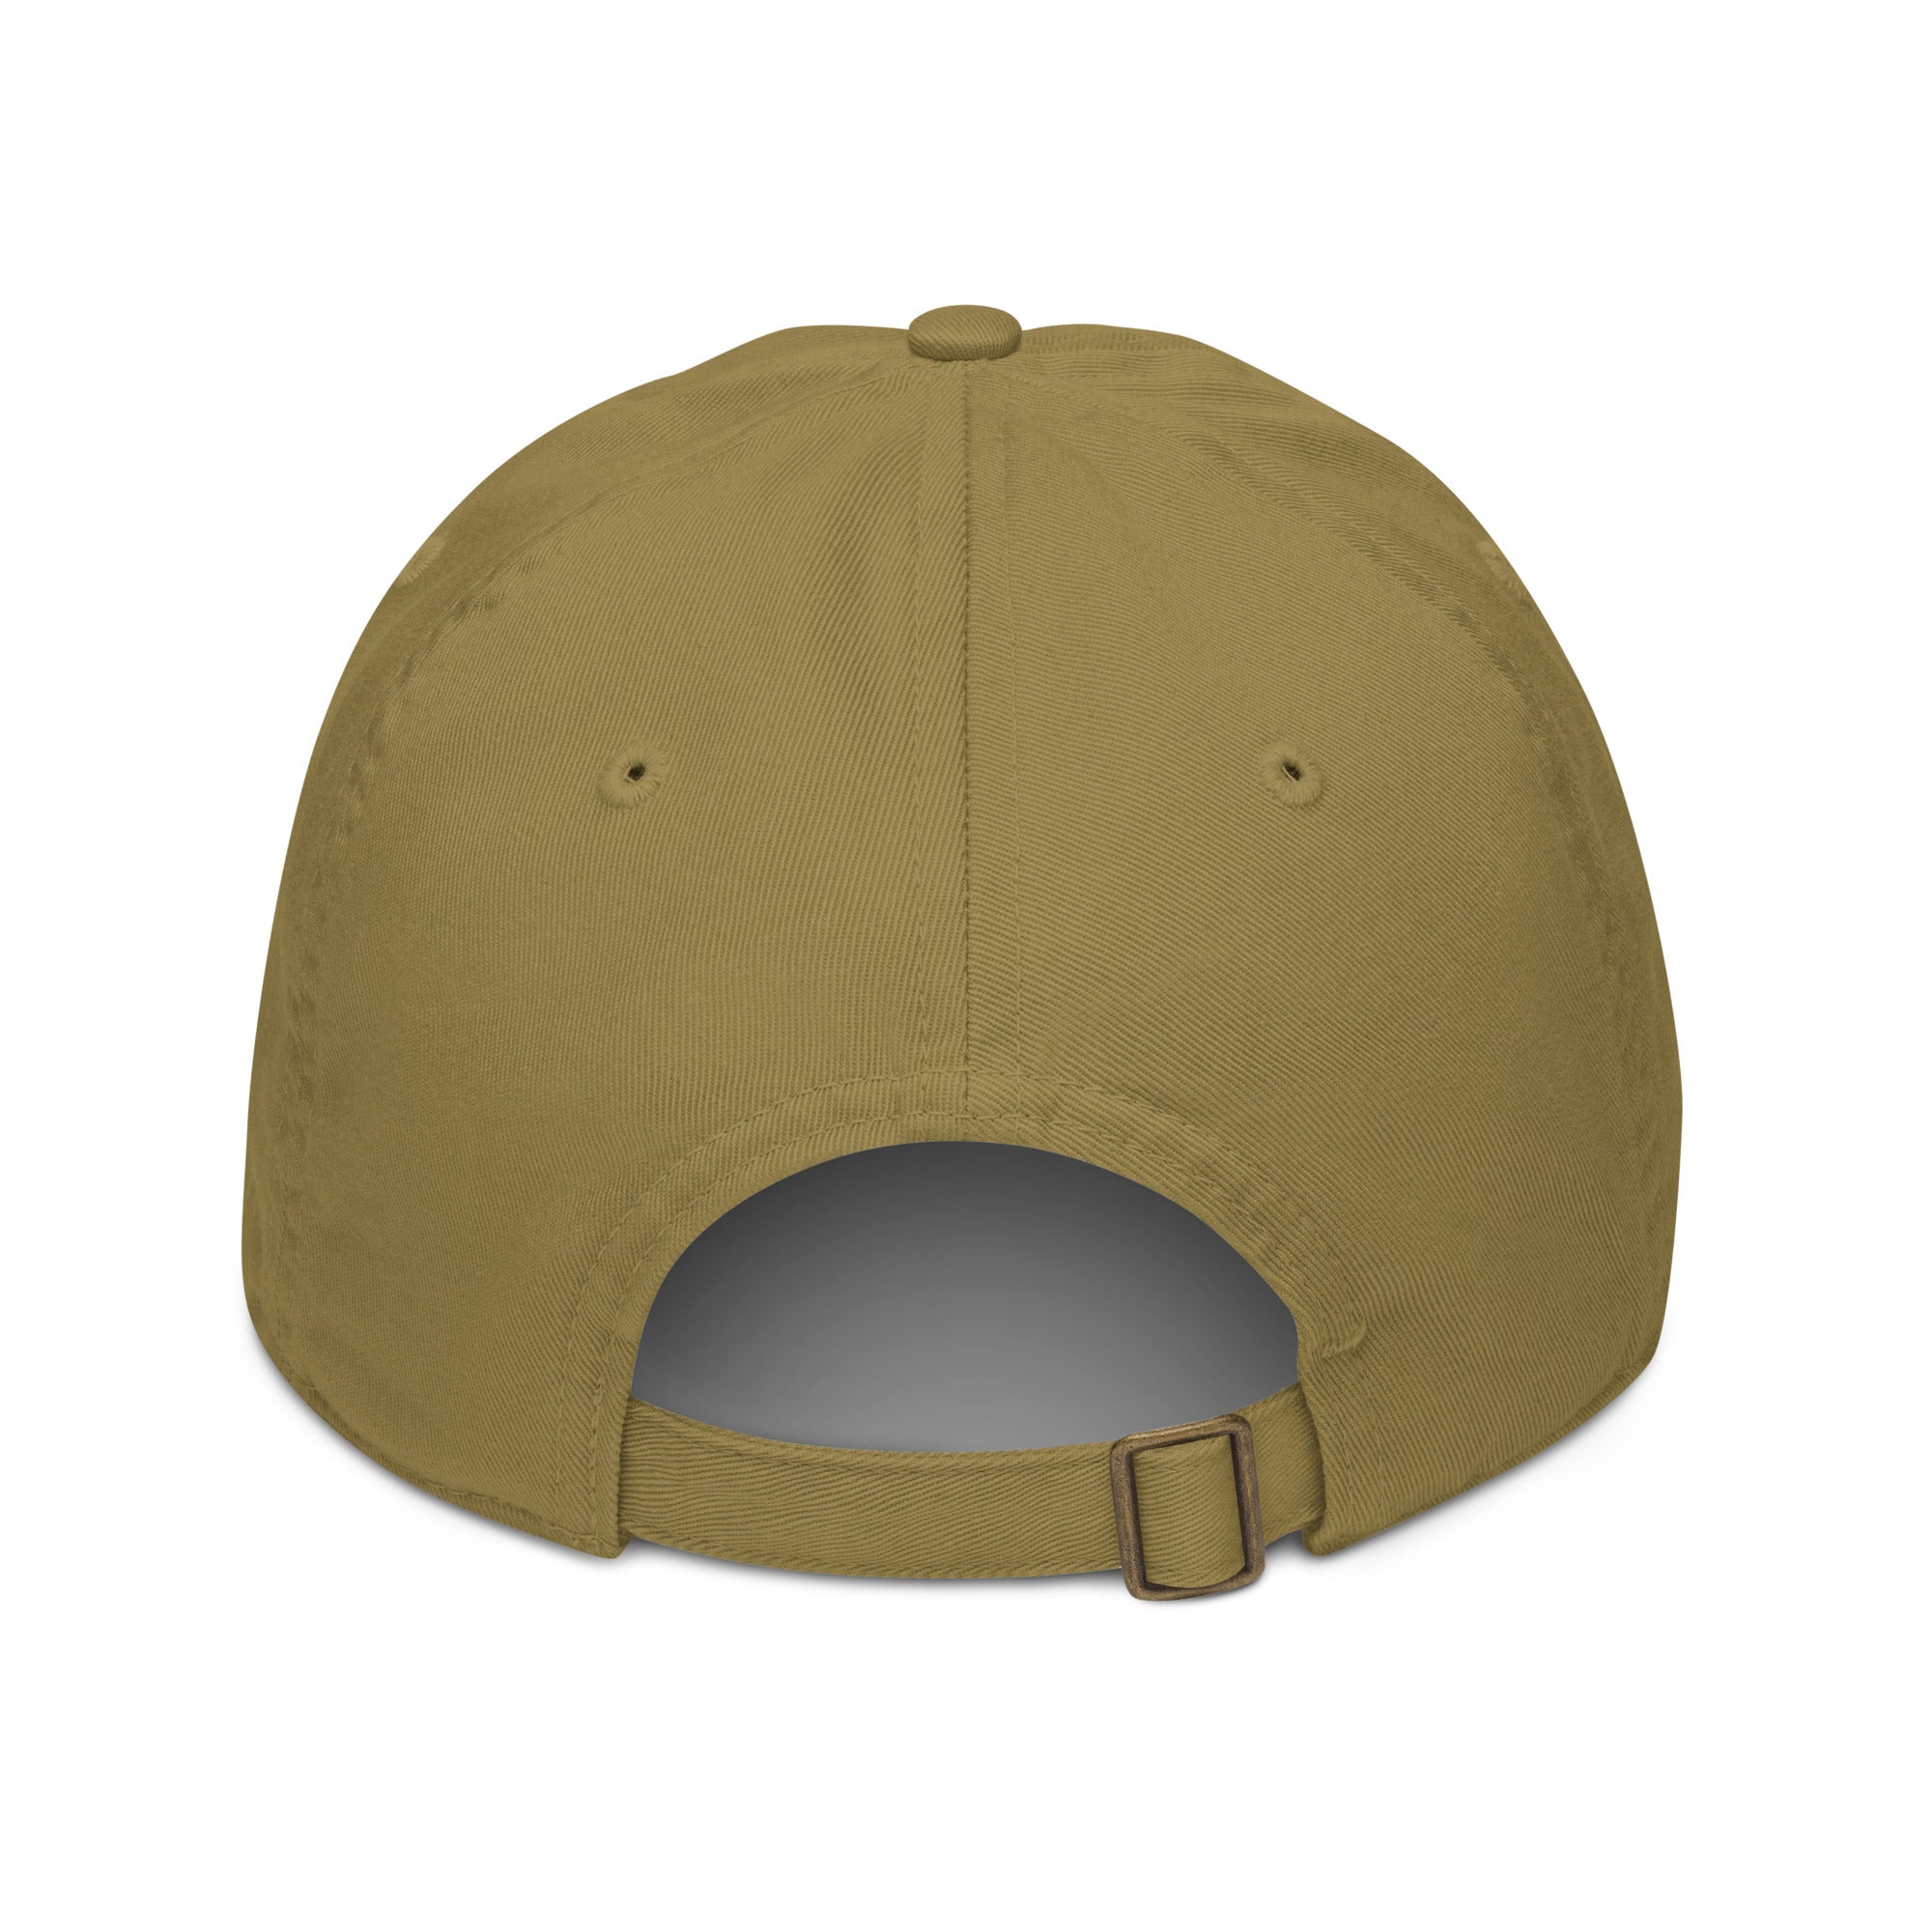 The back of a dark tan hat on a white background